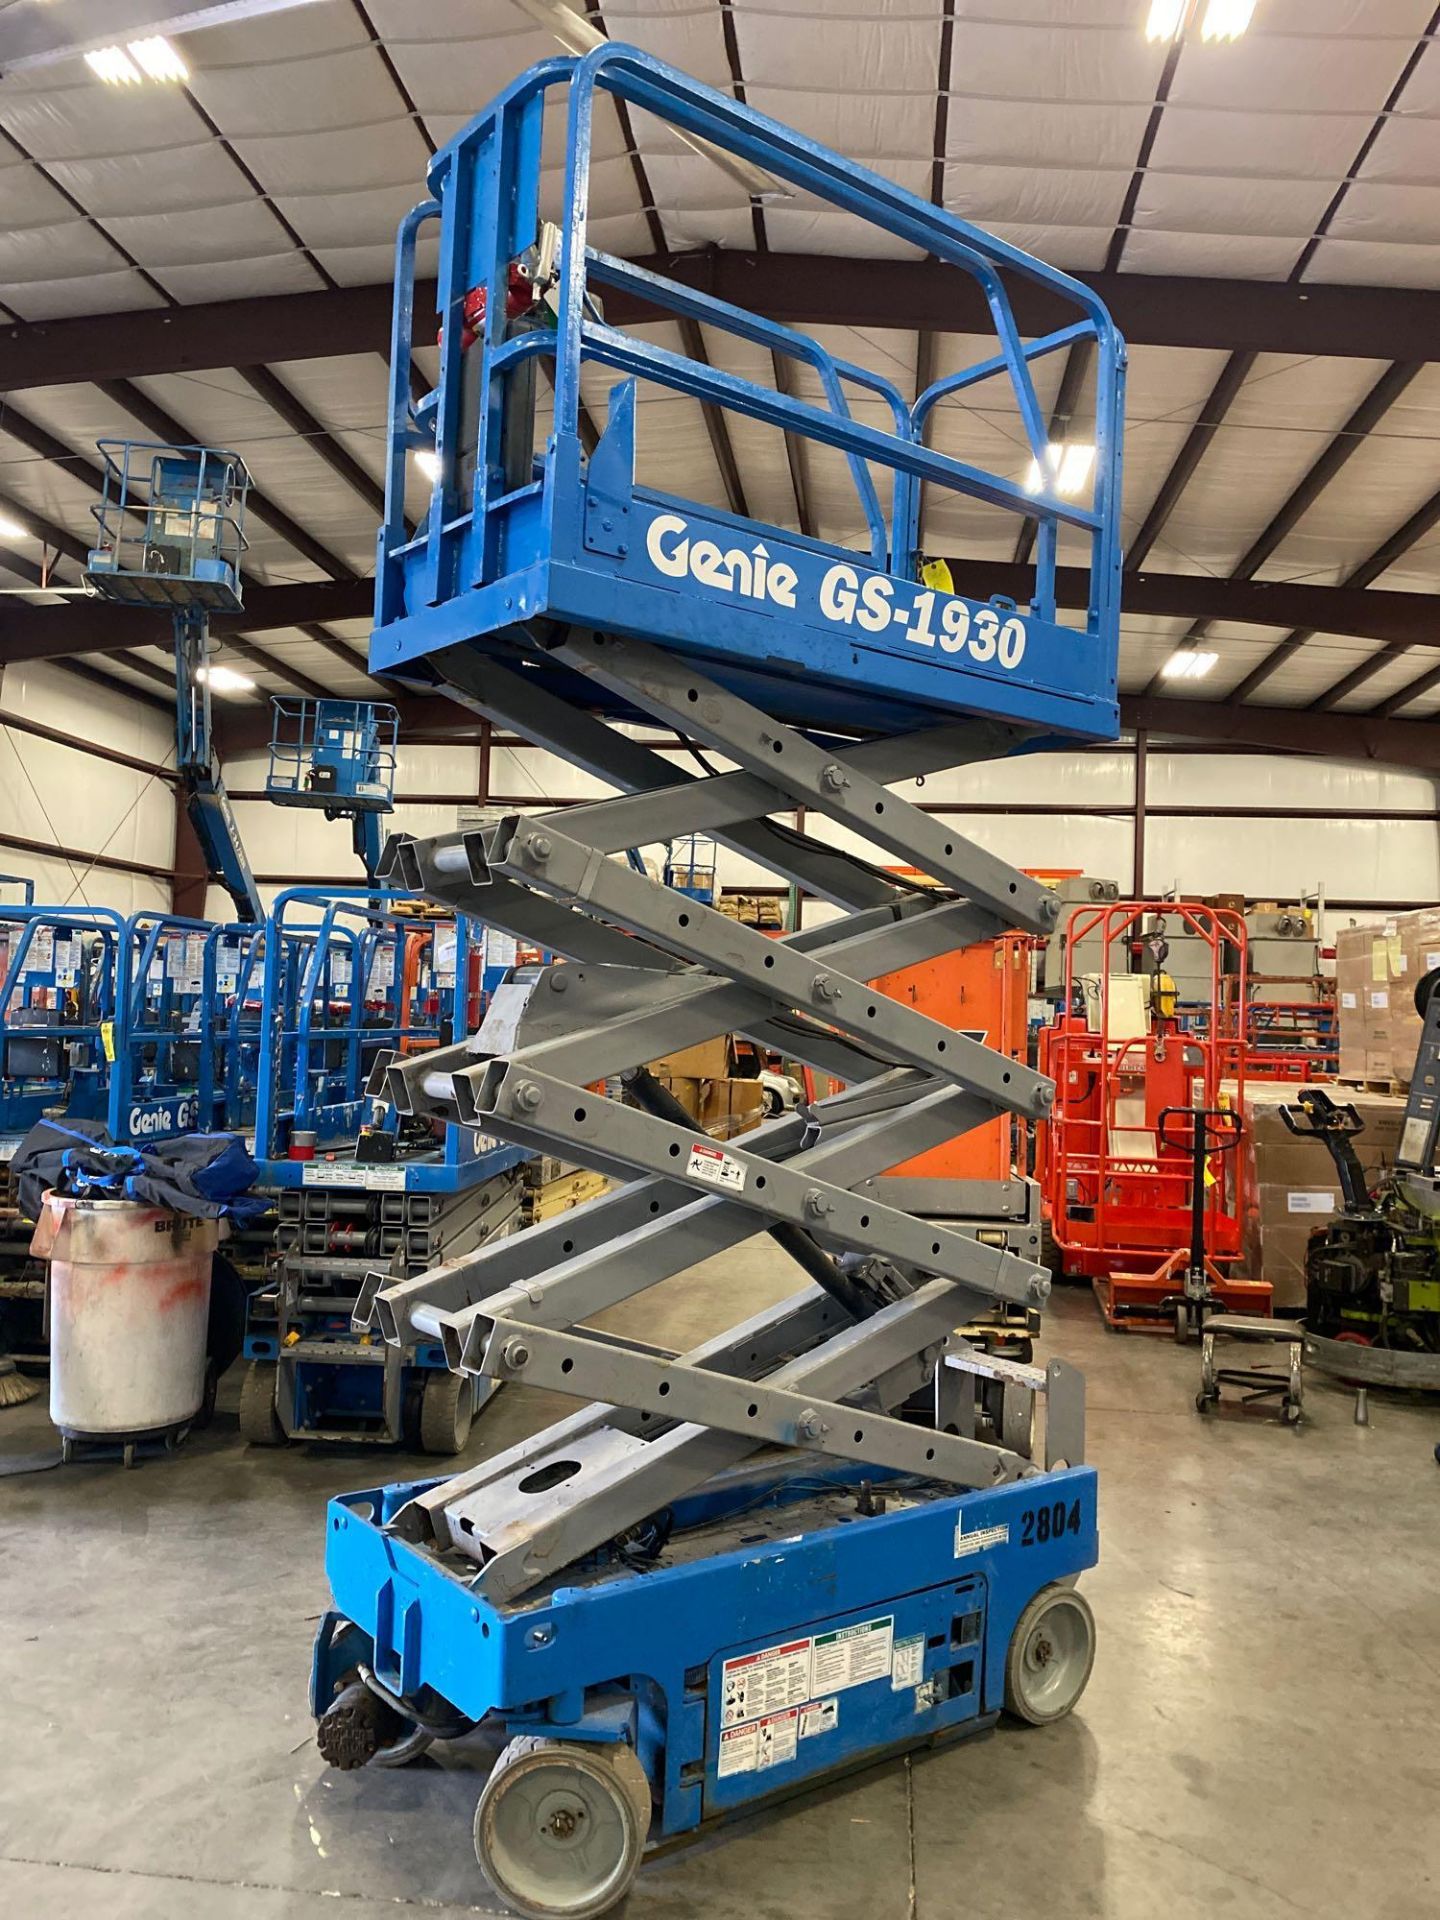 GENIE GS-1930 SCISSOR LIFT, BUILT IN CHARGER, RUNS AND OPERATES - Image 7 of 8